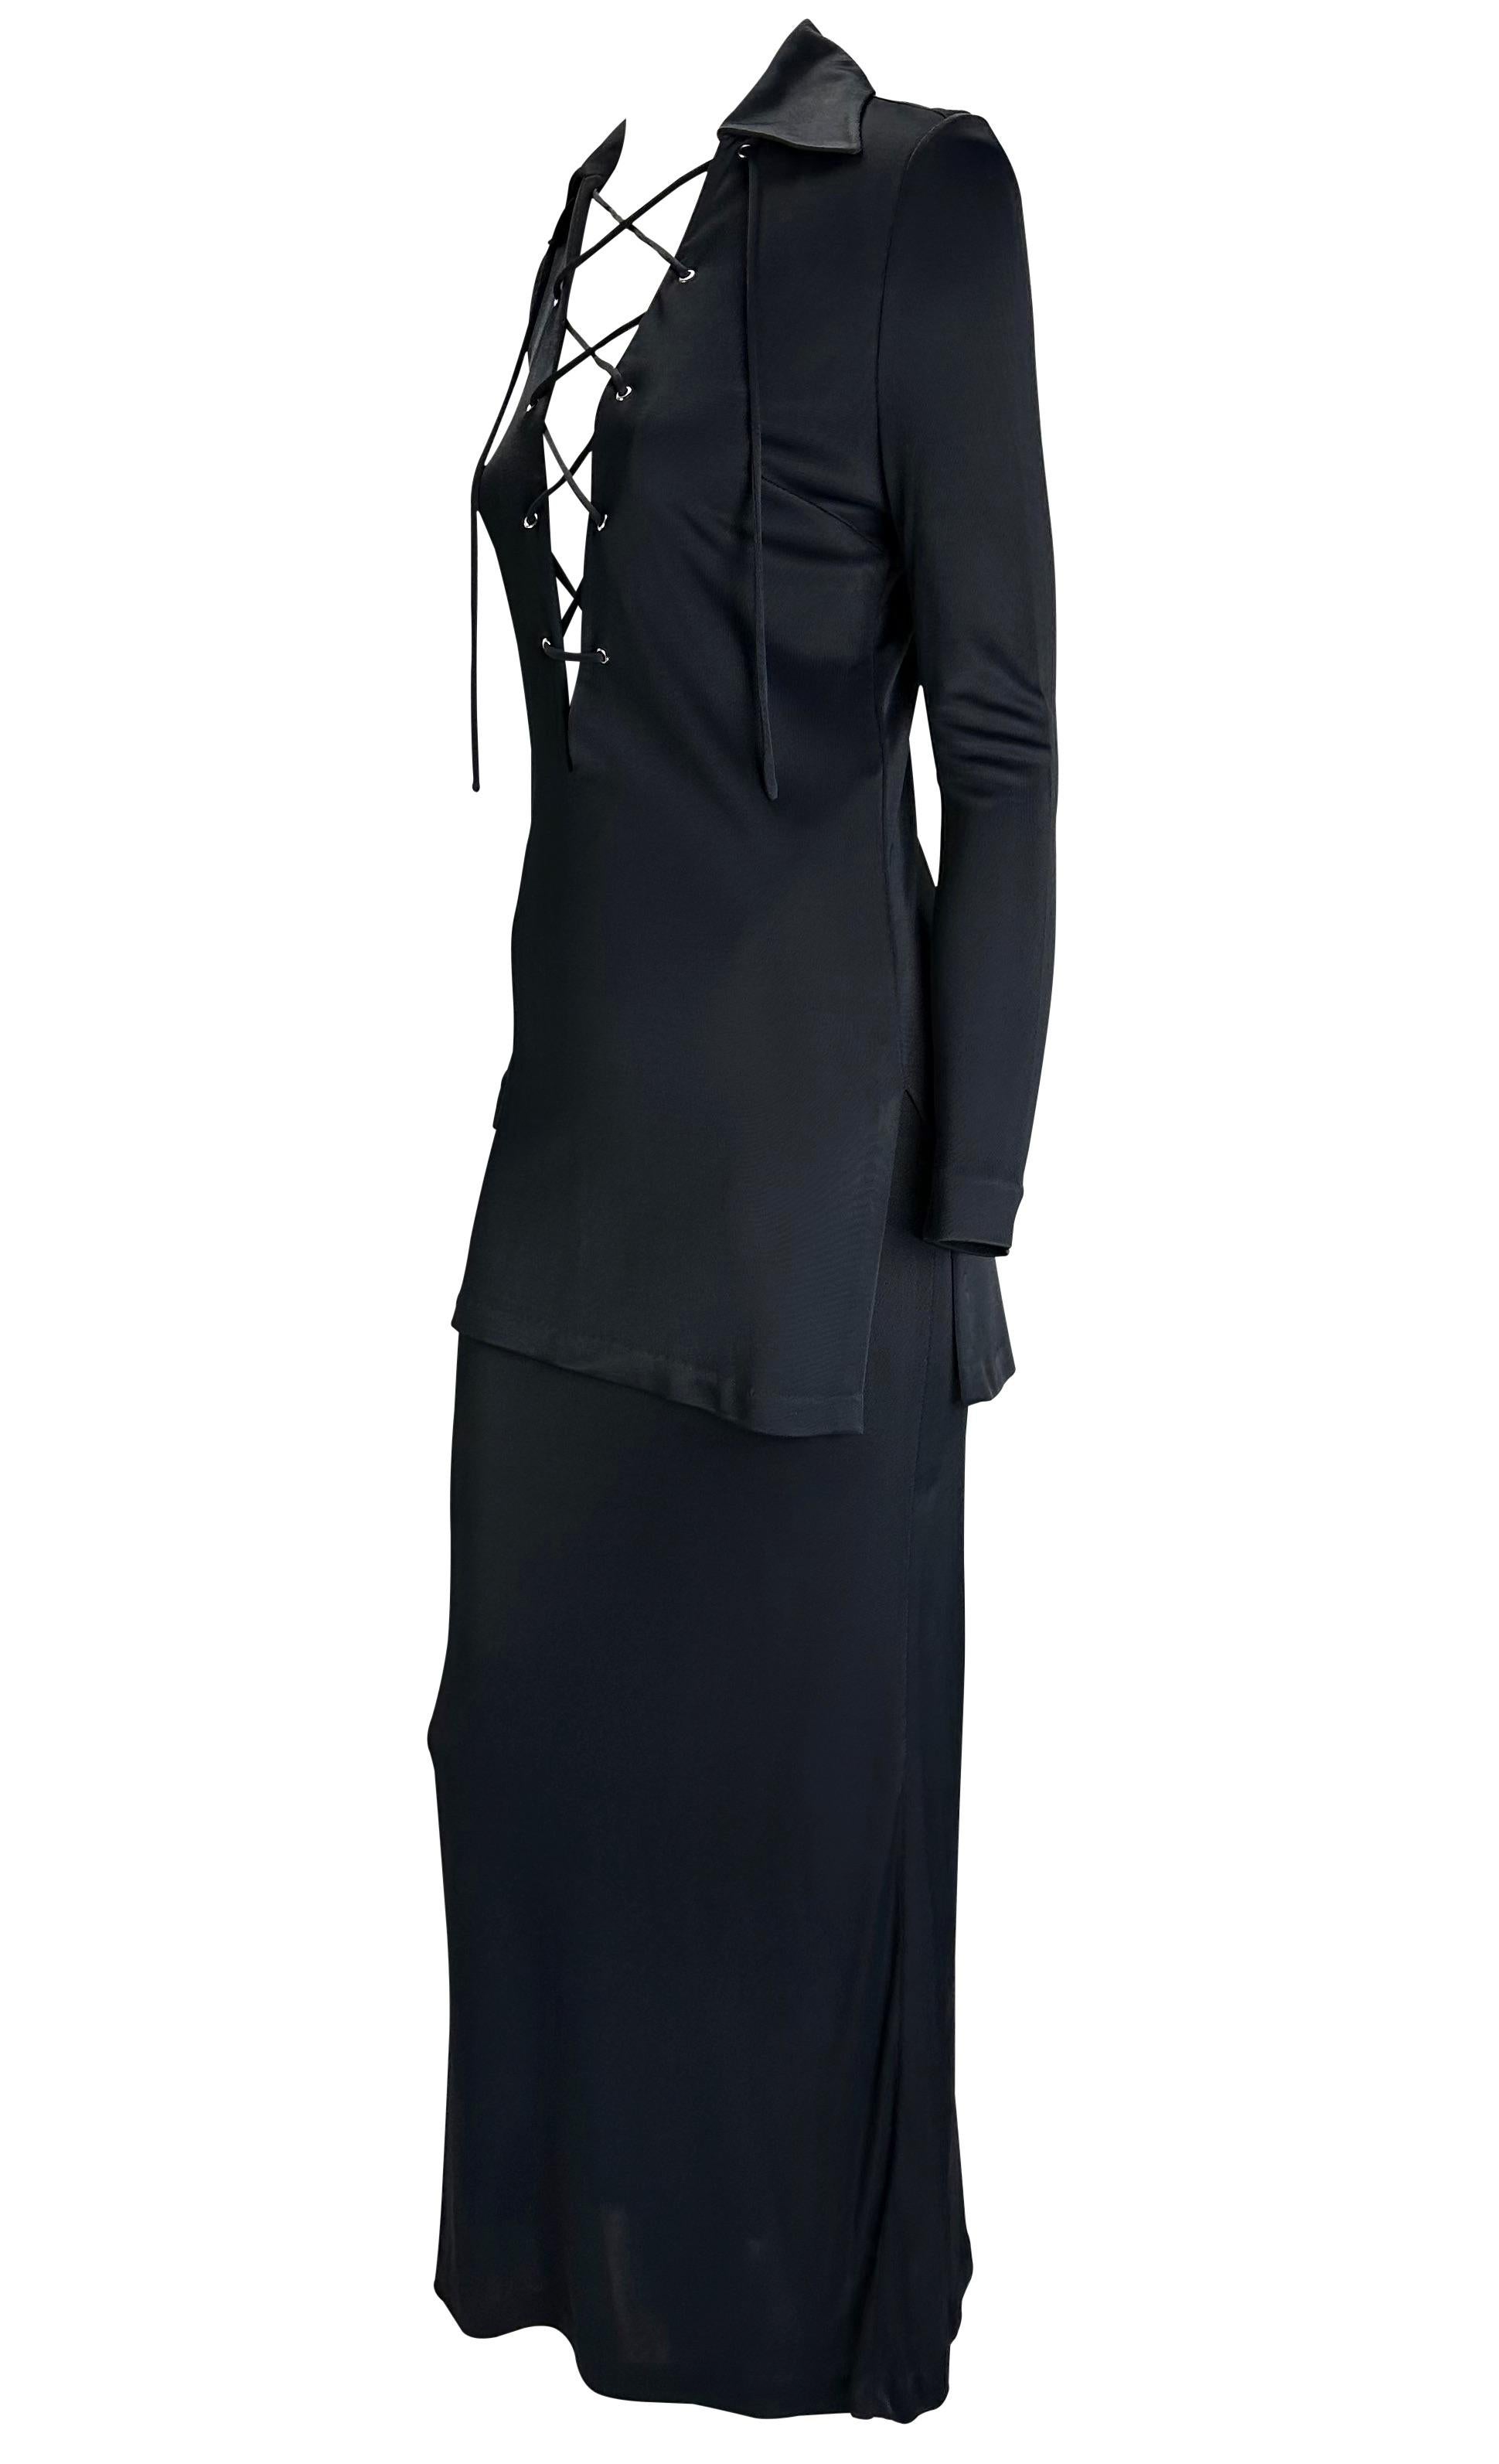 Women's S/S 1996 Gucci by Tom Ford Madonna VH1 Lace-Up Tunic Navy Viscose Skirt Set For Sale